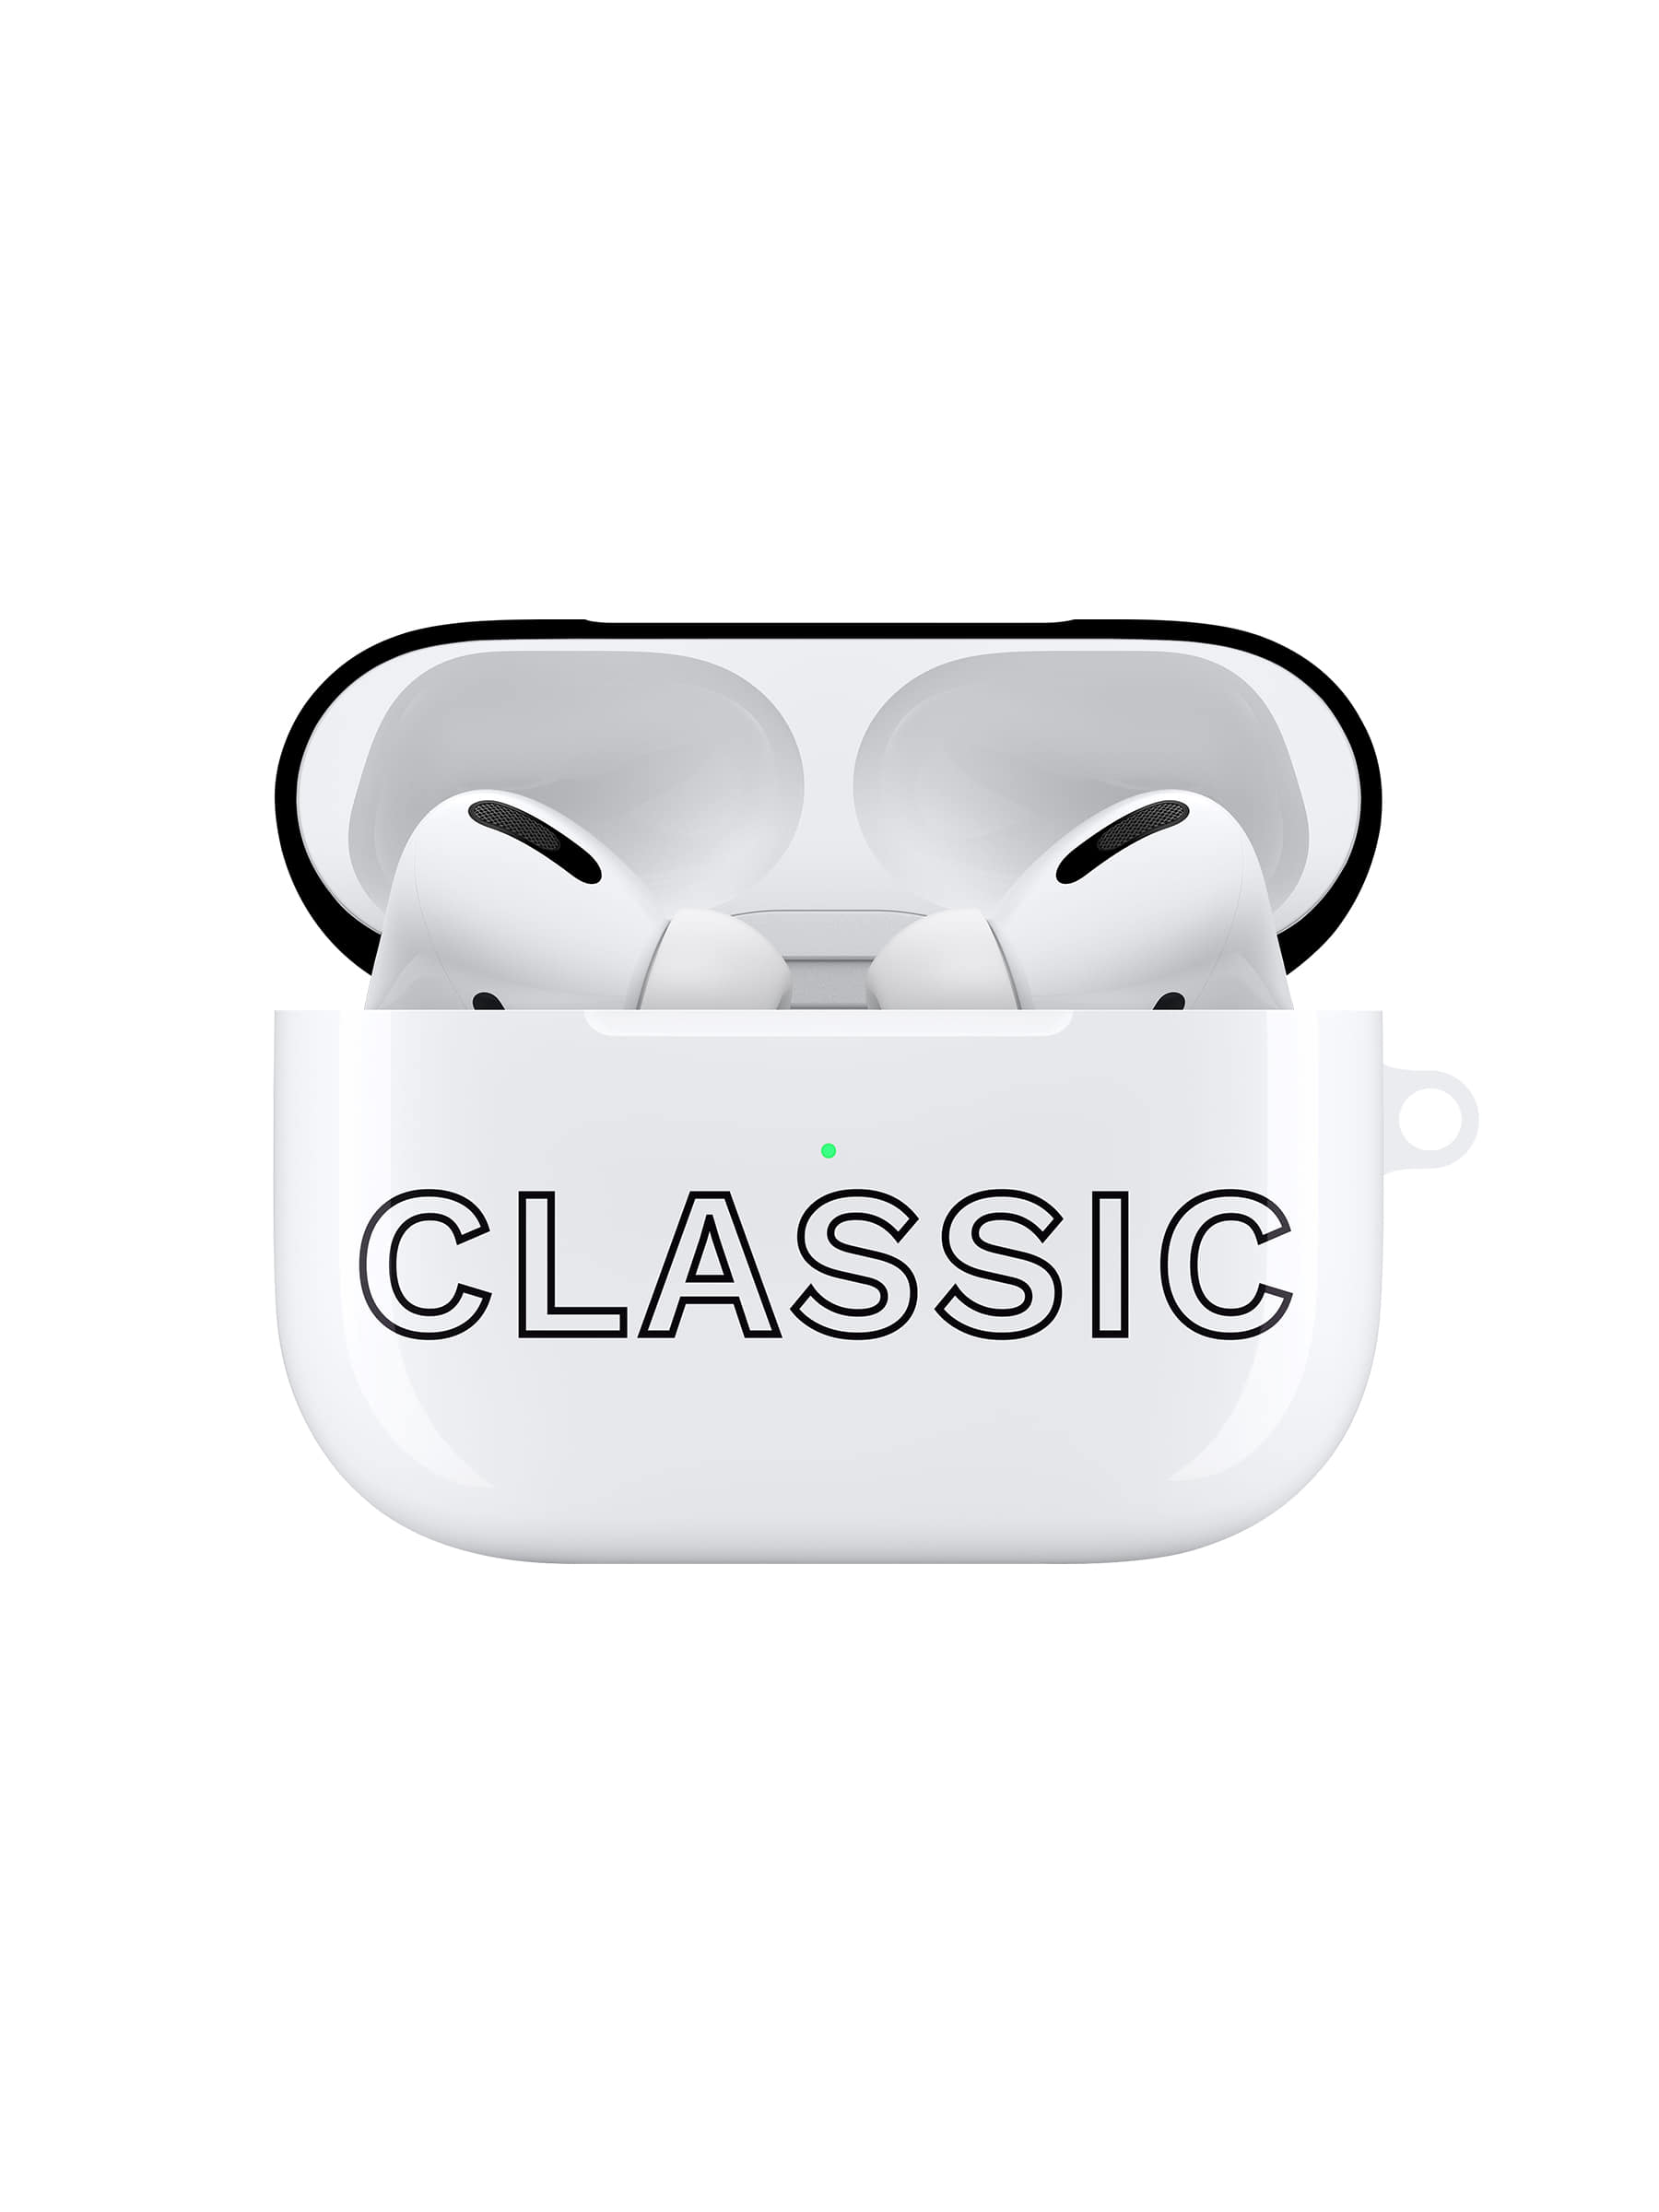 This is mine [Classics Forever : AirPods III &amp; Pro ]